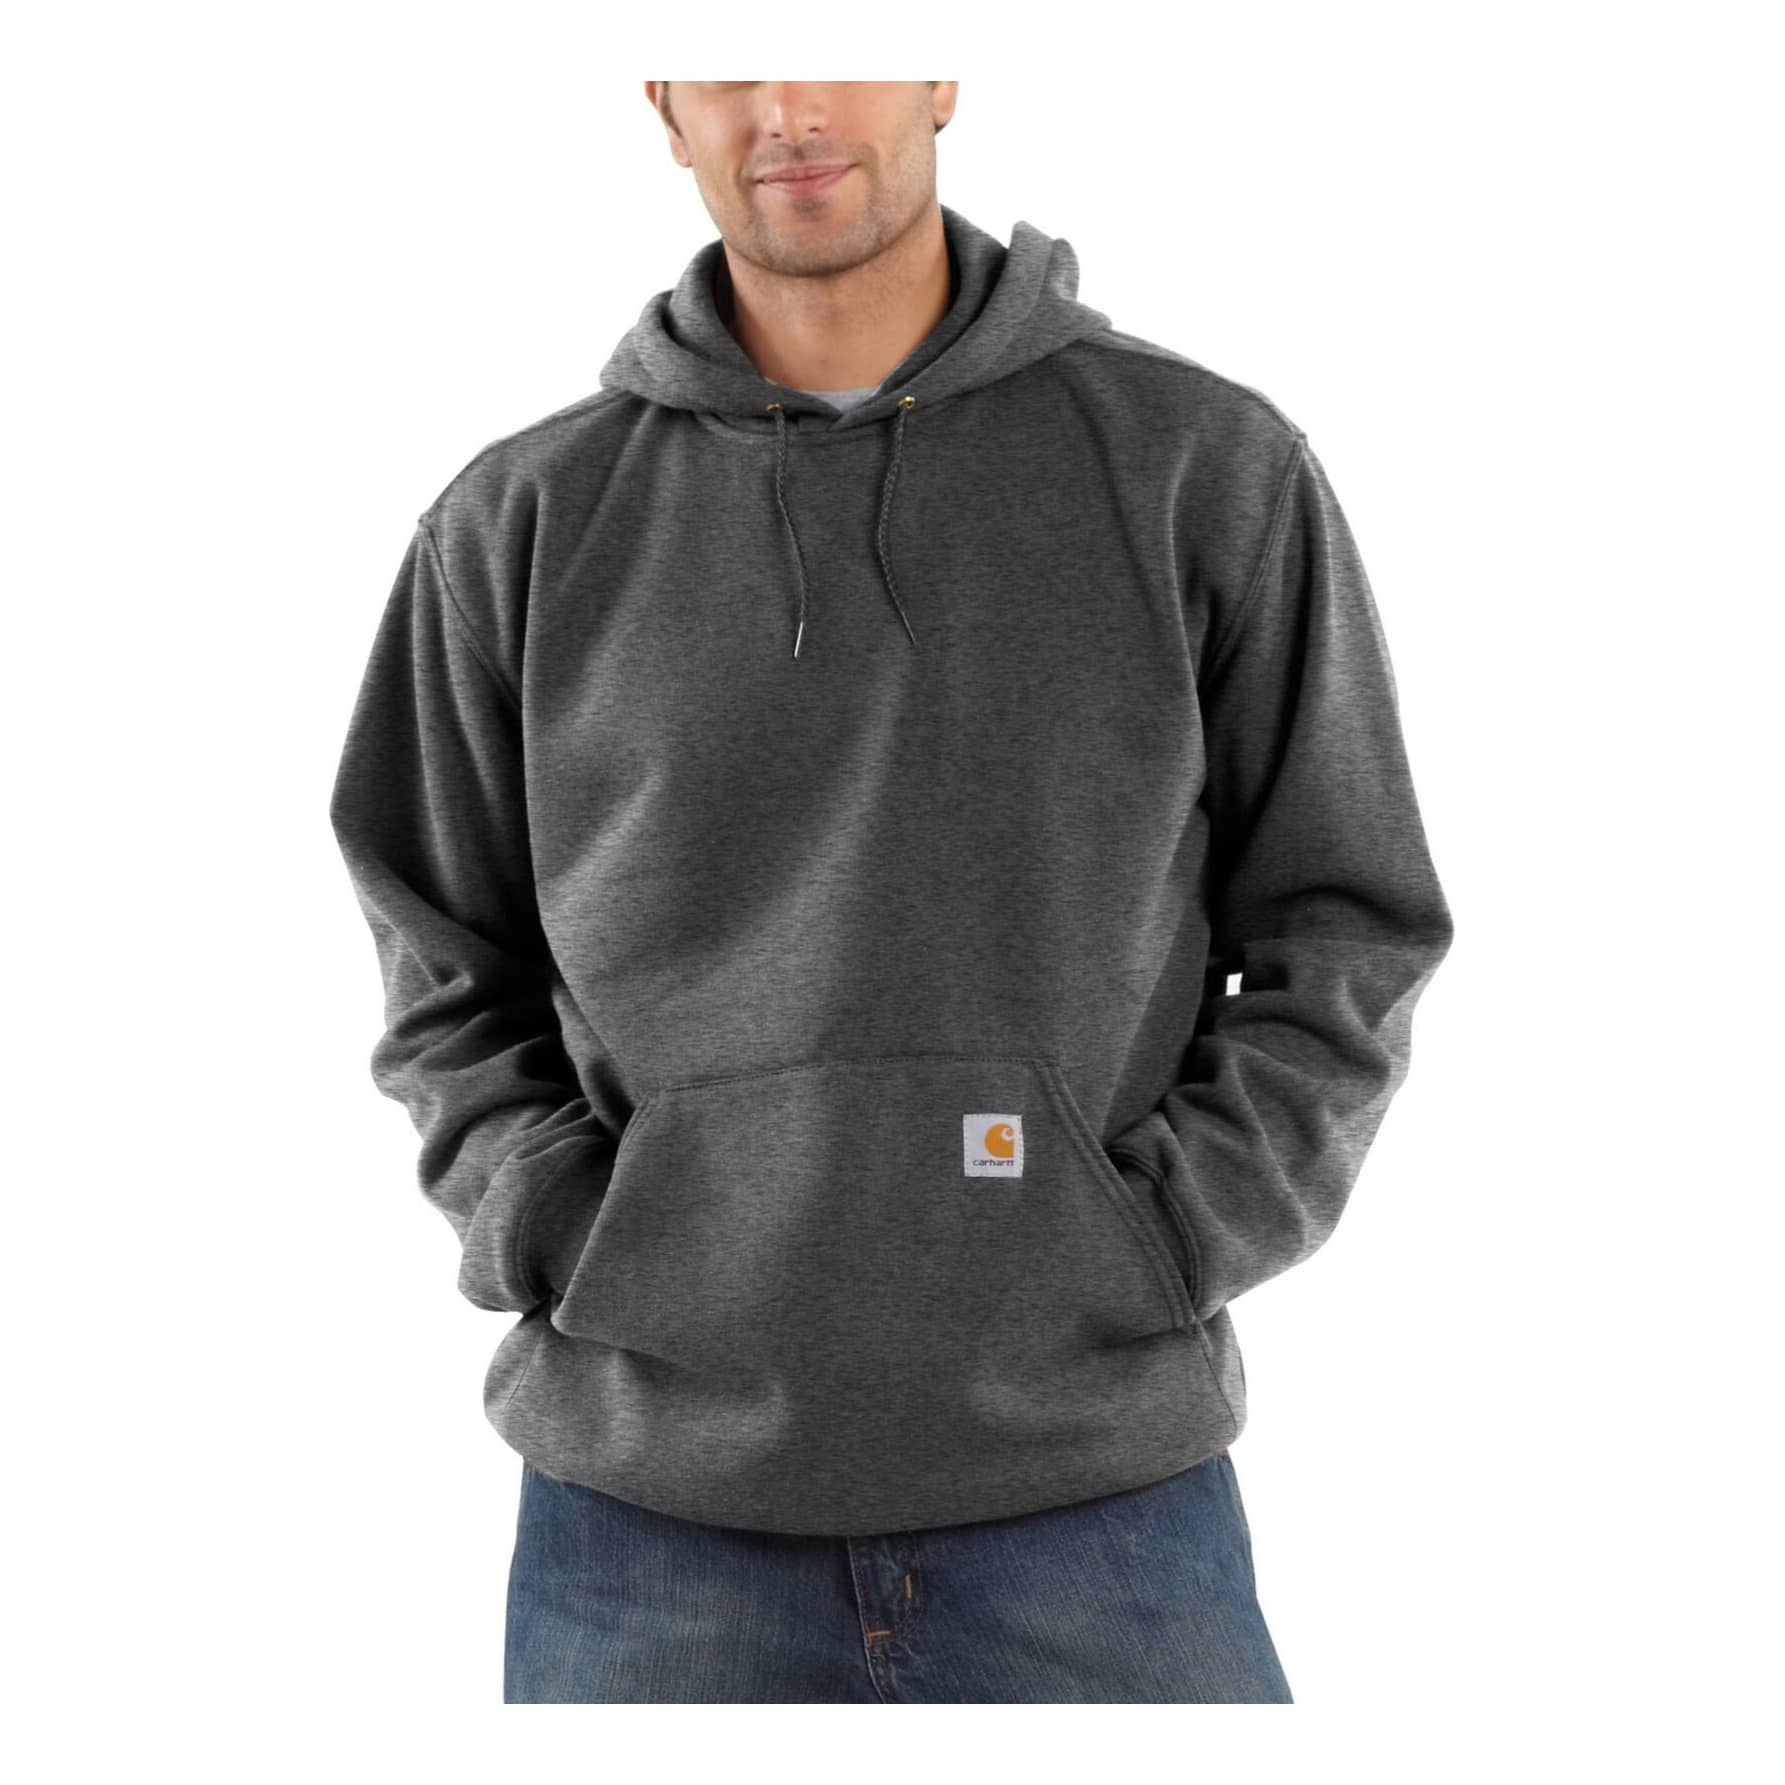 Carhartt® Men’s Loose Fit Midweight Hoodie - Carbon Heather